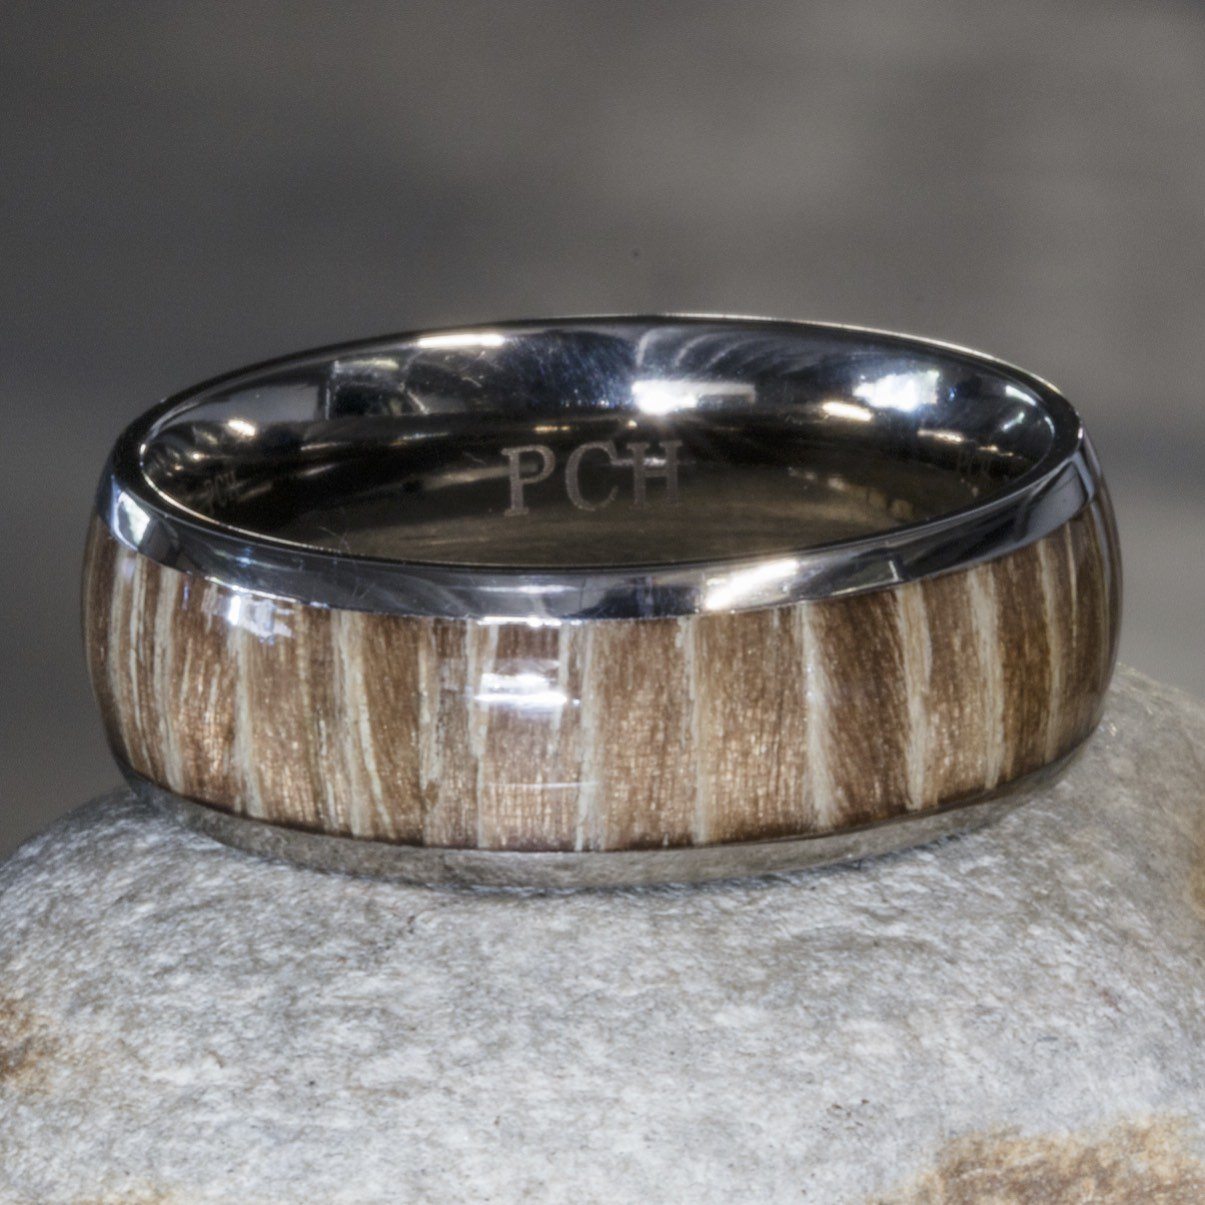 Titanium Wood Ring With Ashen Rose Zebra Wood, 8mm Comfort Fit Wedding Band - PCH Rings